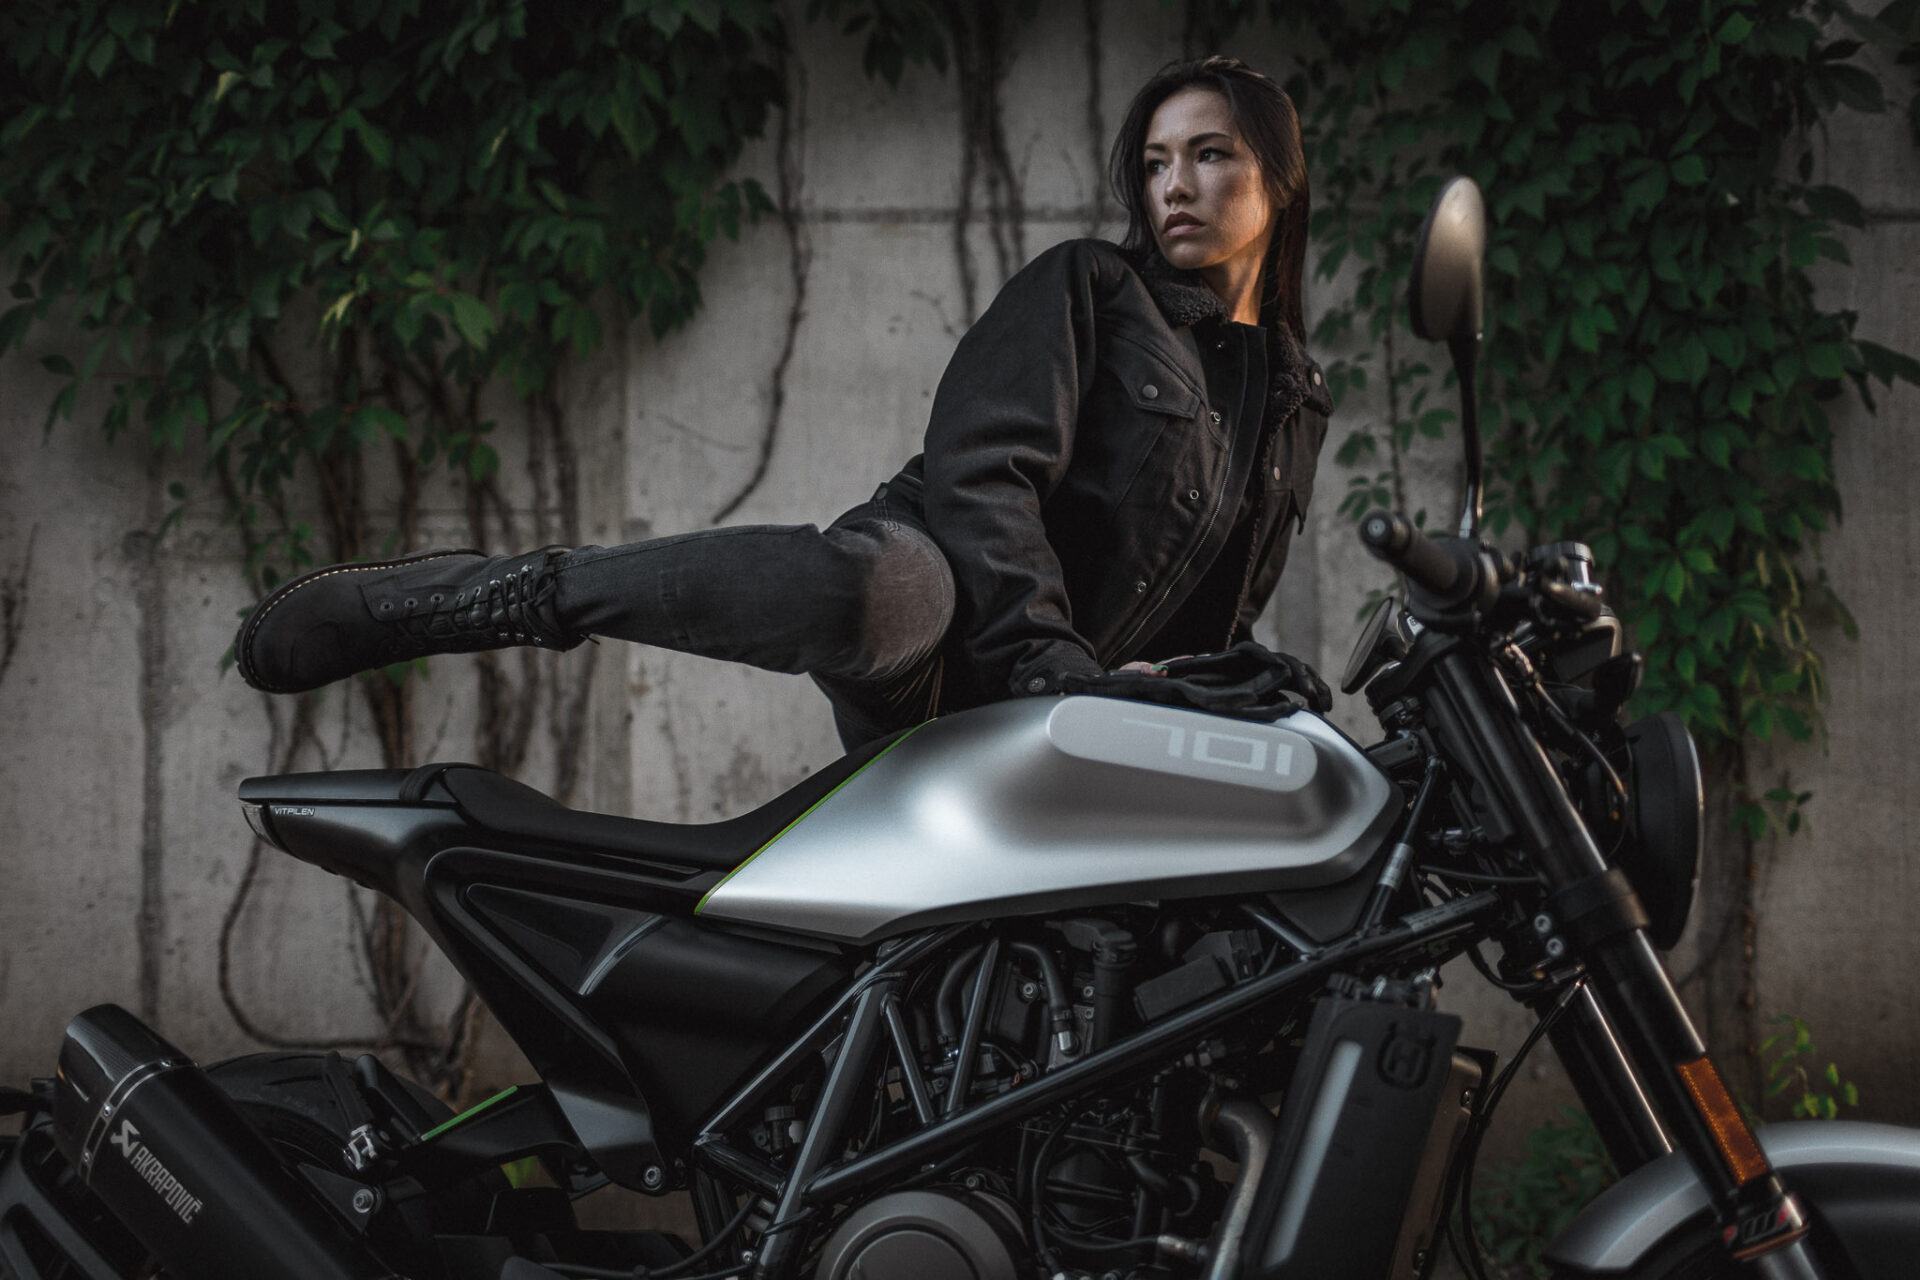 Leather Pants for Women's, Leather Pants Motorcycle Pants High